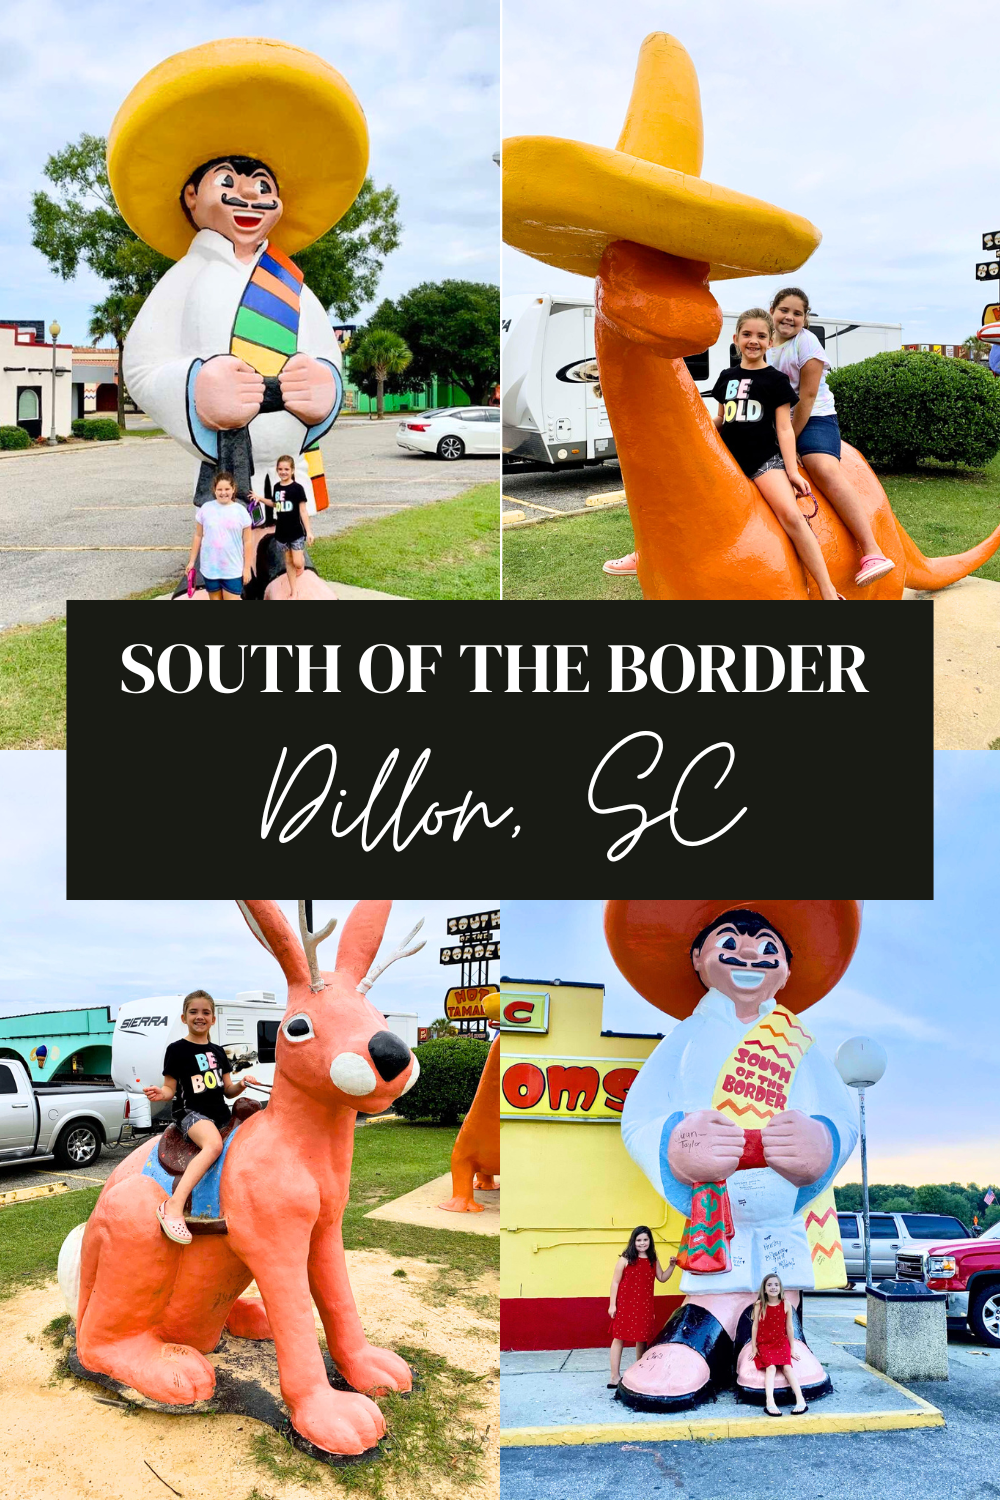 Everything you need to know about the iconic I-95 roadside attraction South of the Border